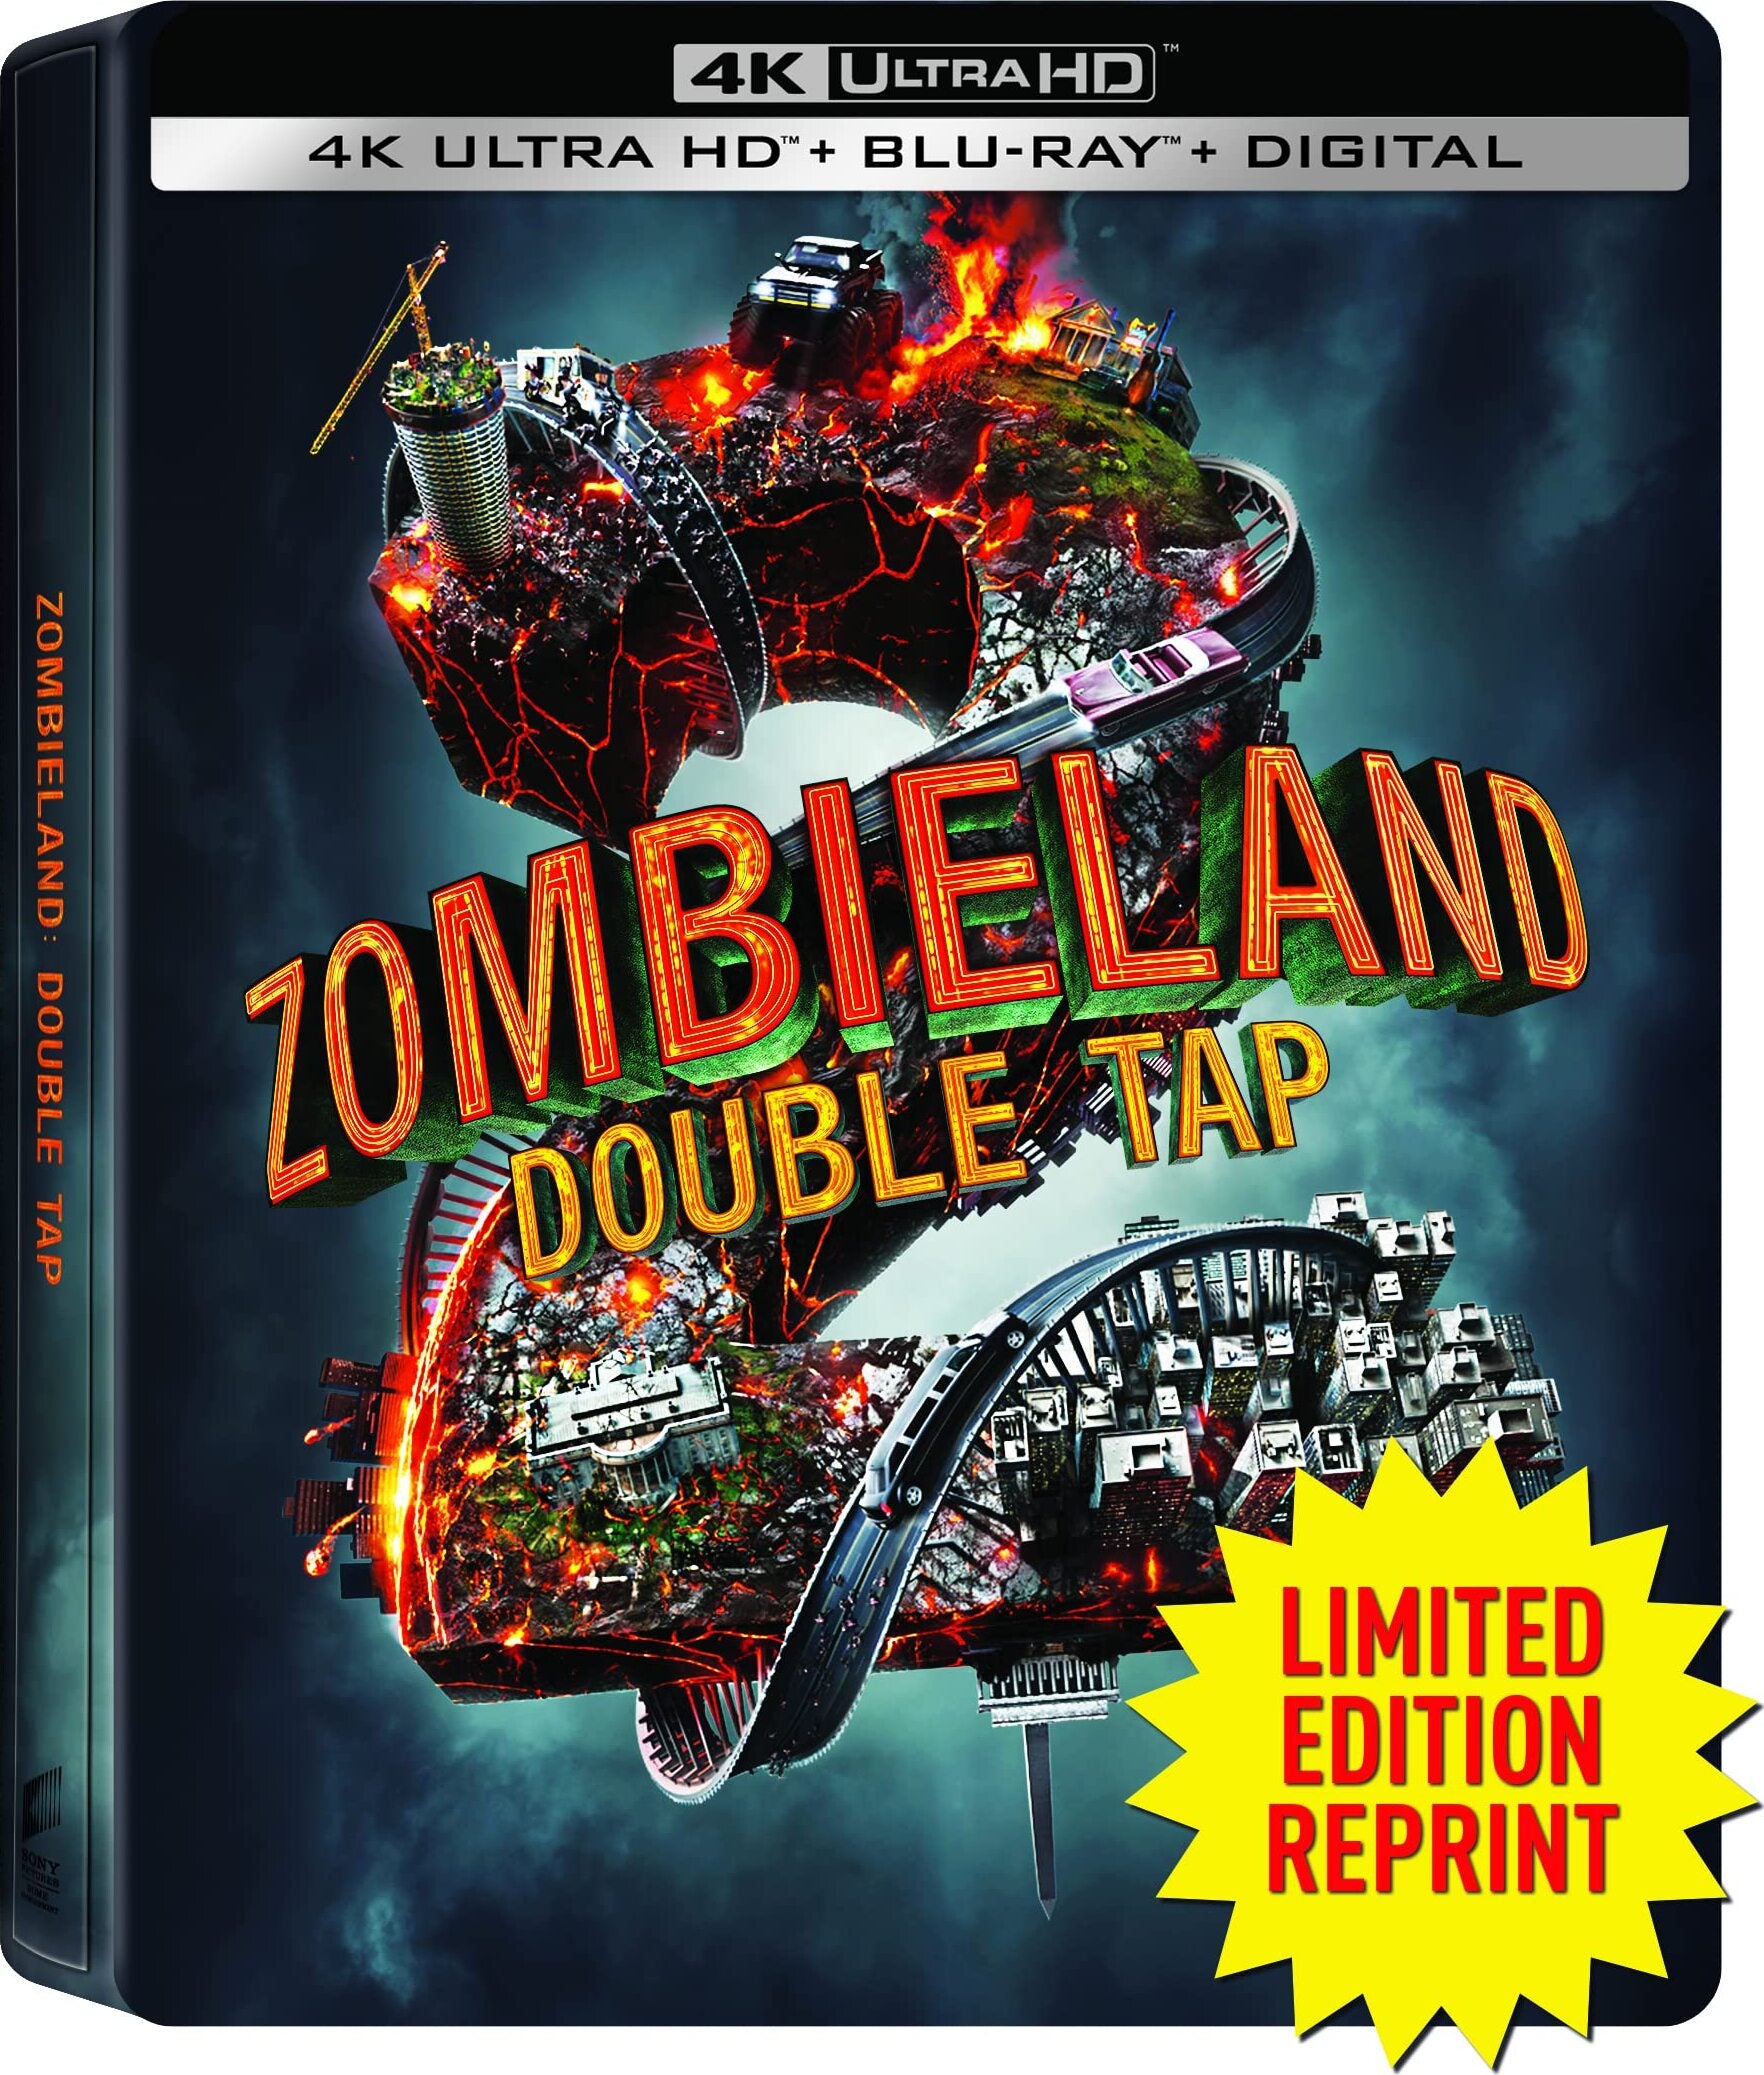 ZOMBIELAND: DOUBLE TAP (LIMITED EDITION) 4K UHD/BLU-RAY STEELBOOK